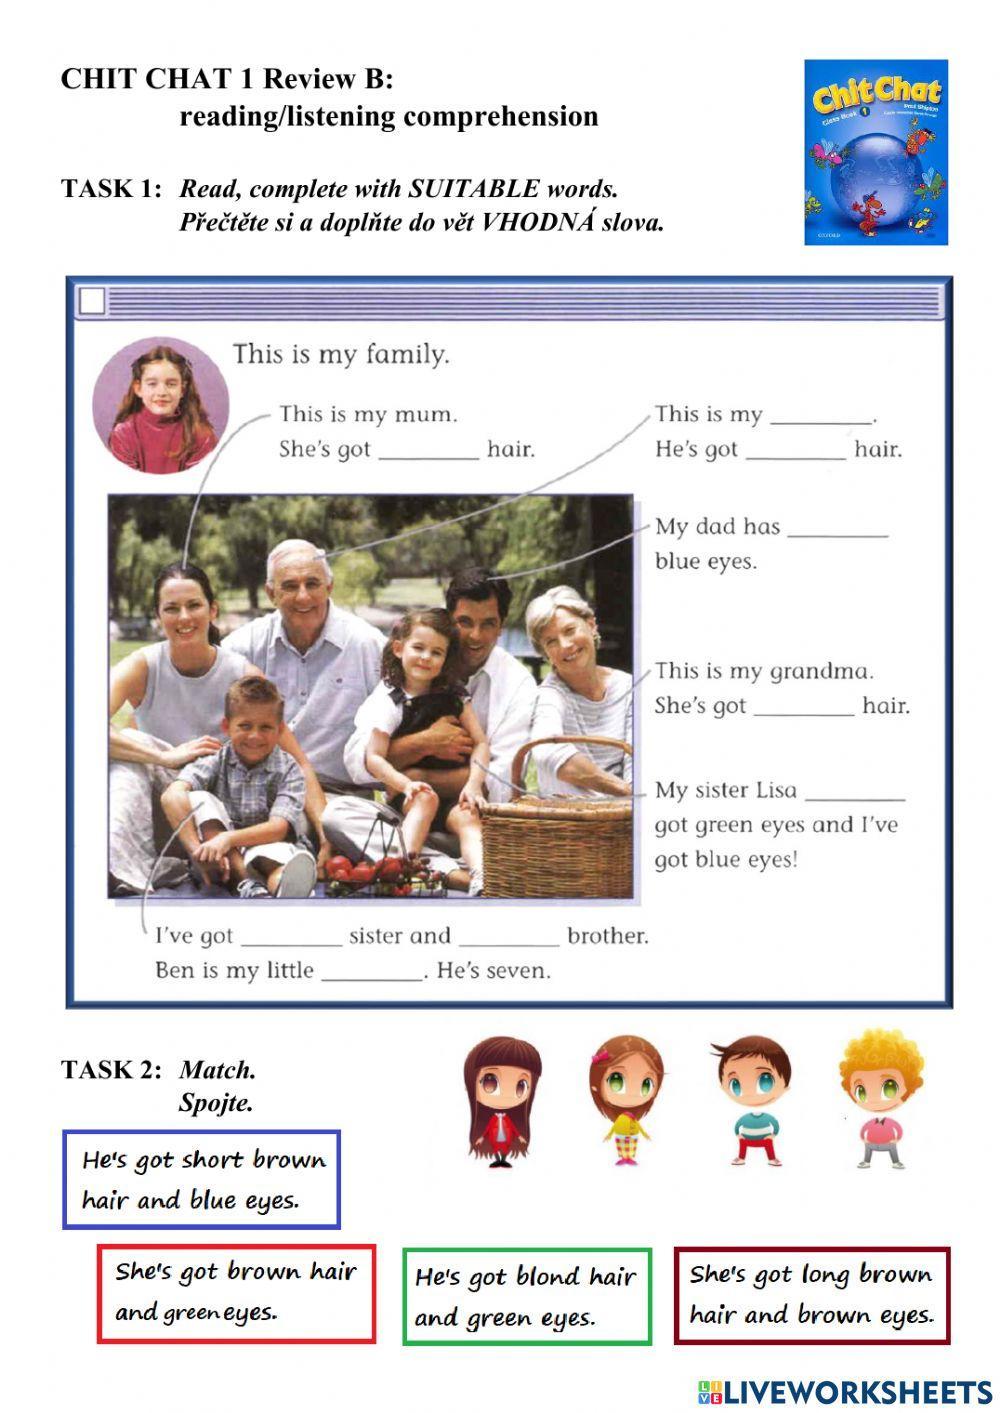 Chit Chat 1 Review B - Family- Describing people